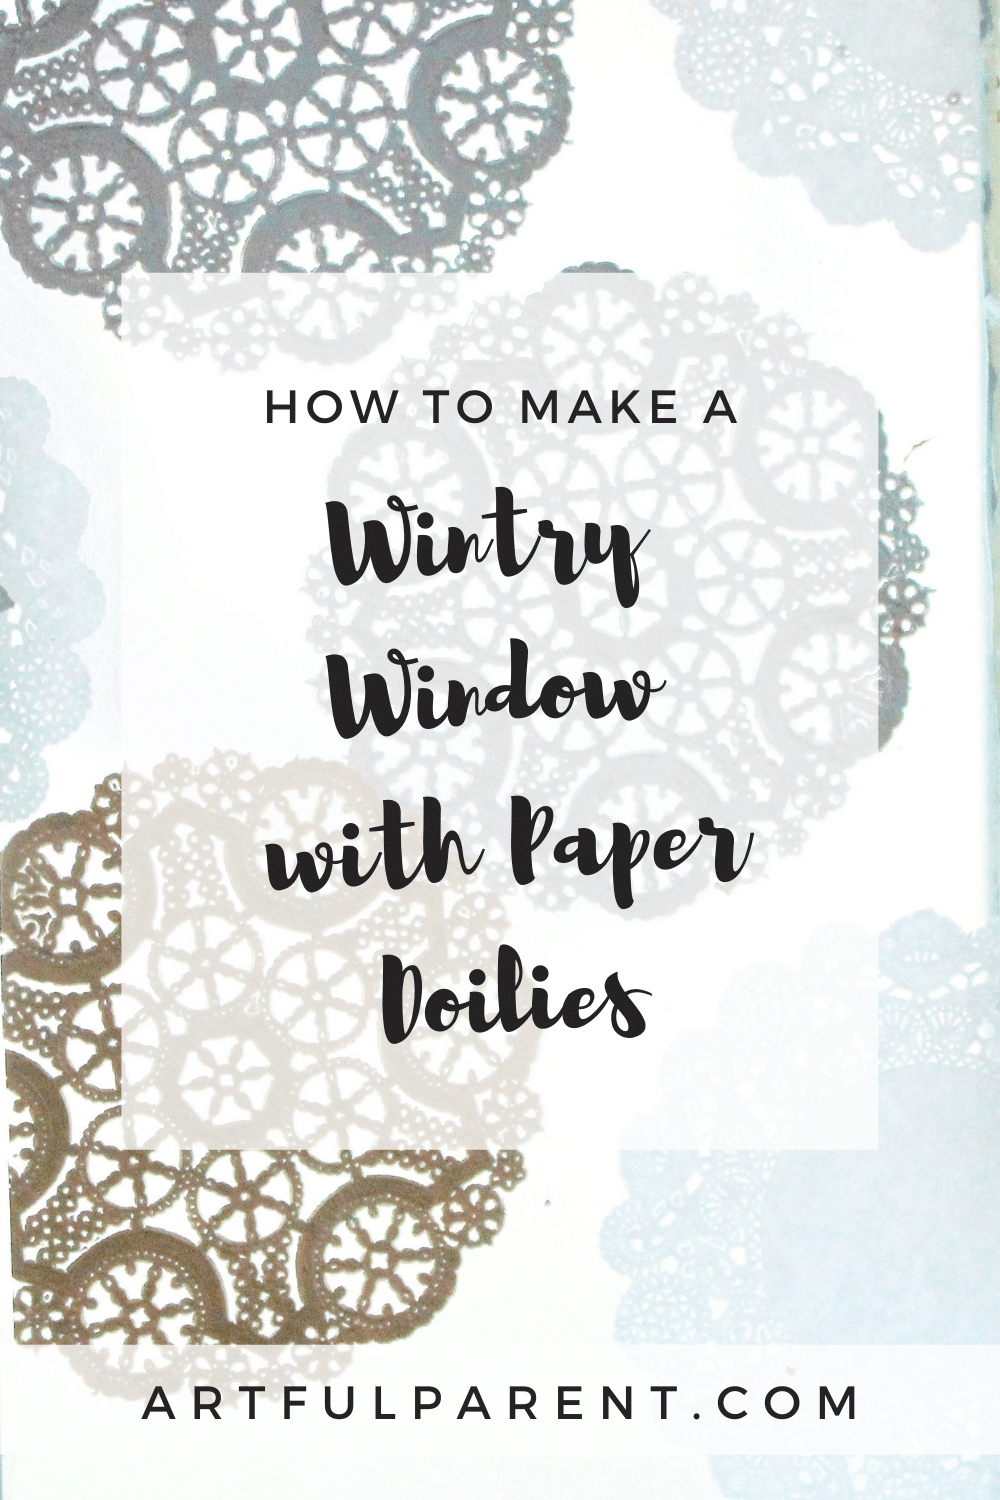 How To Make a Wintry Window with Paper Doilies